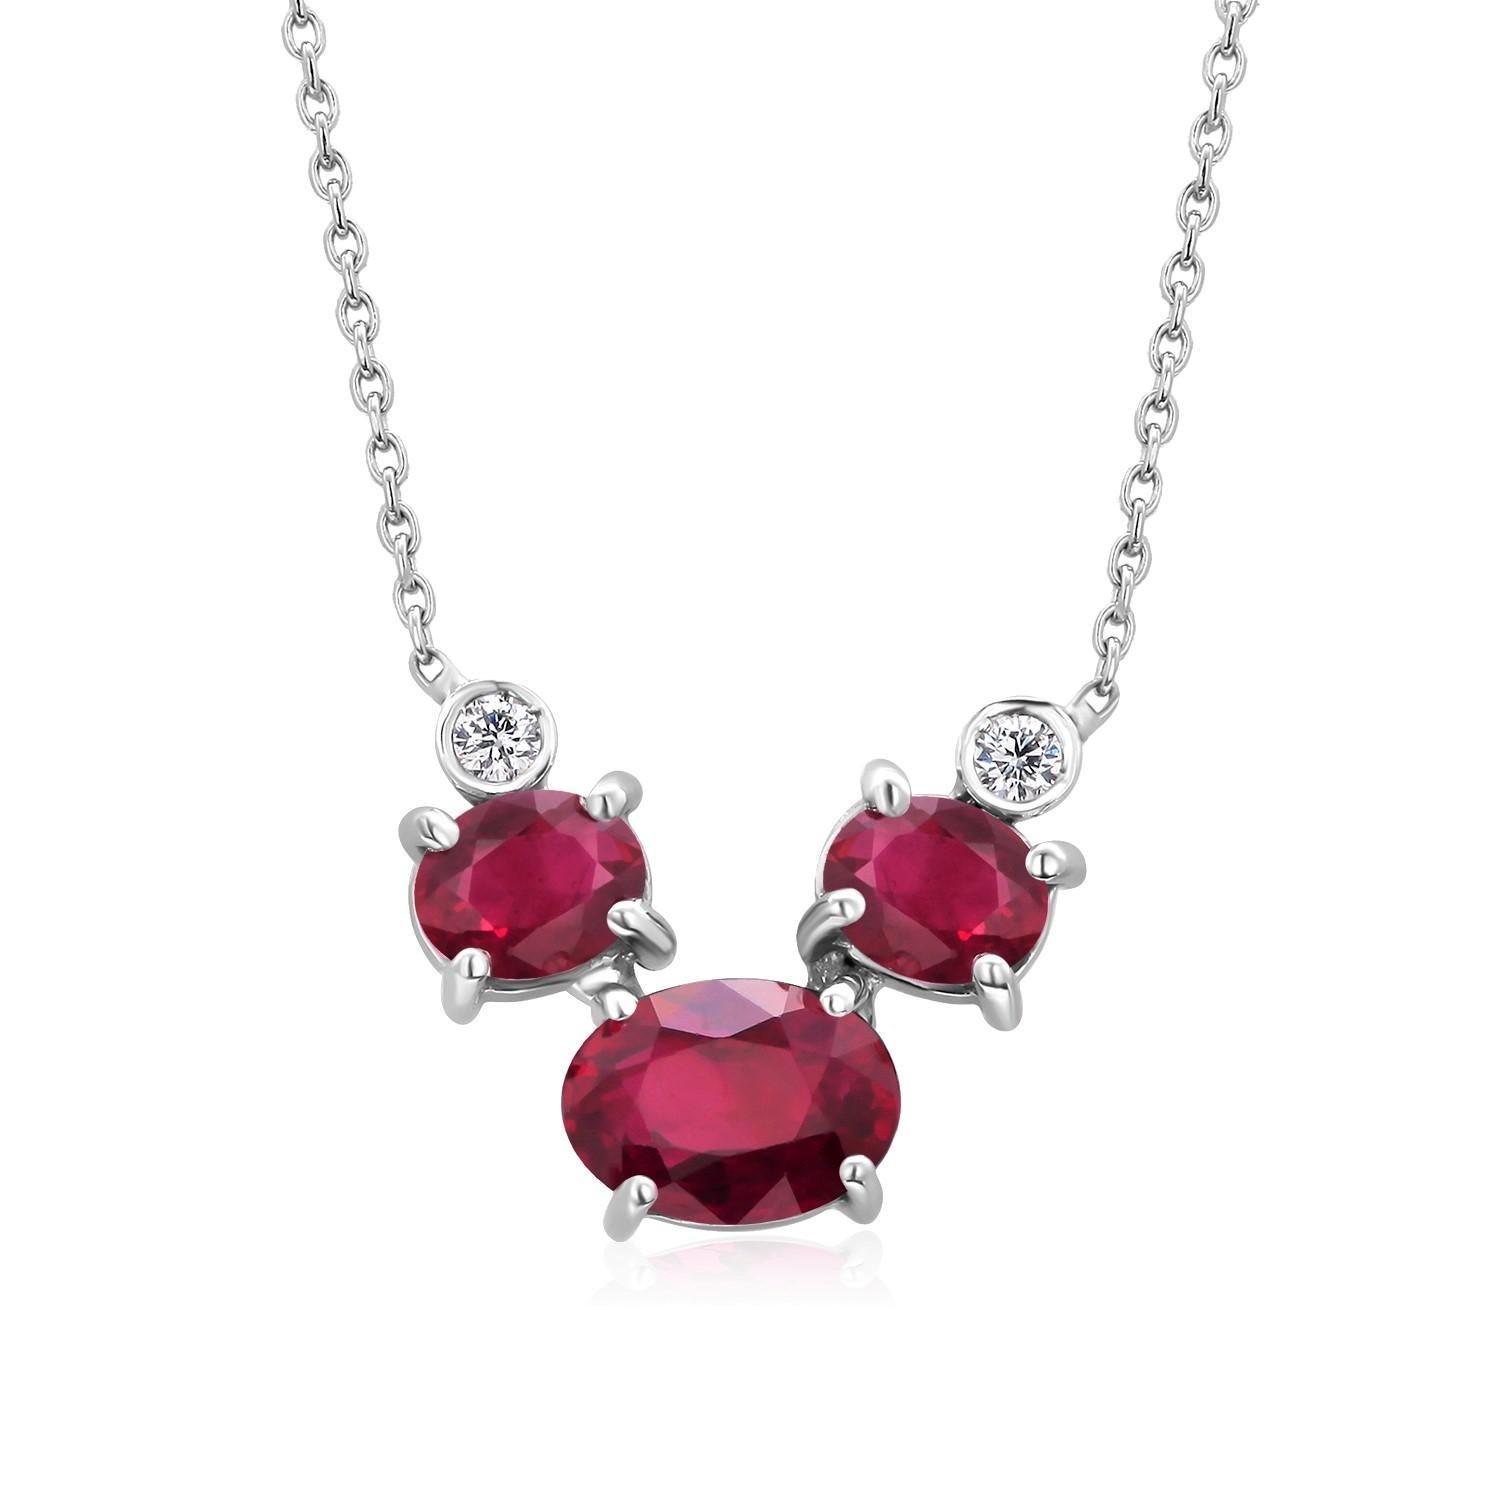 Women's or Men's Three Oval Burma Red Rubies and Two Bezel Diamonds Rubies Gold Pendant Necklace